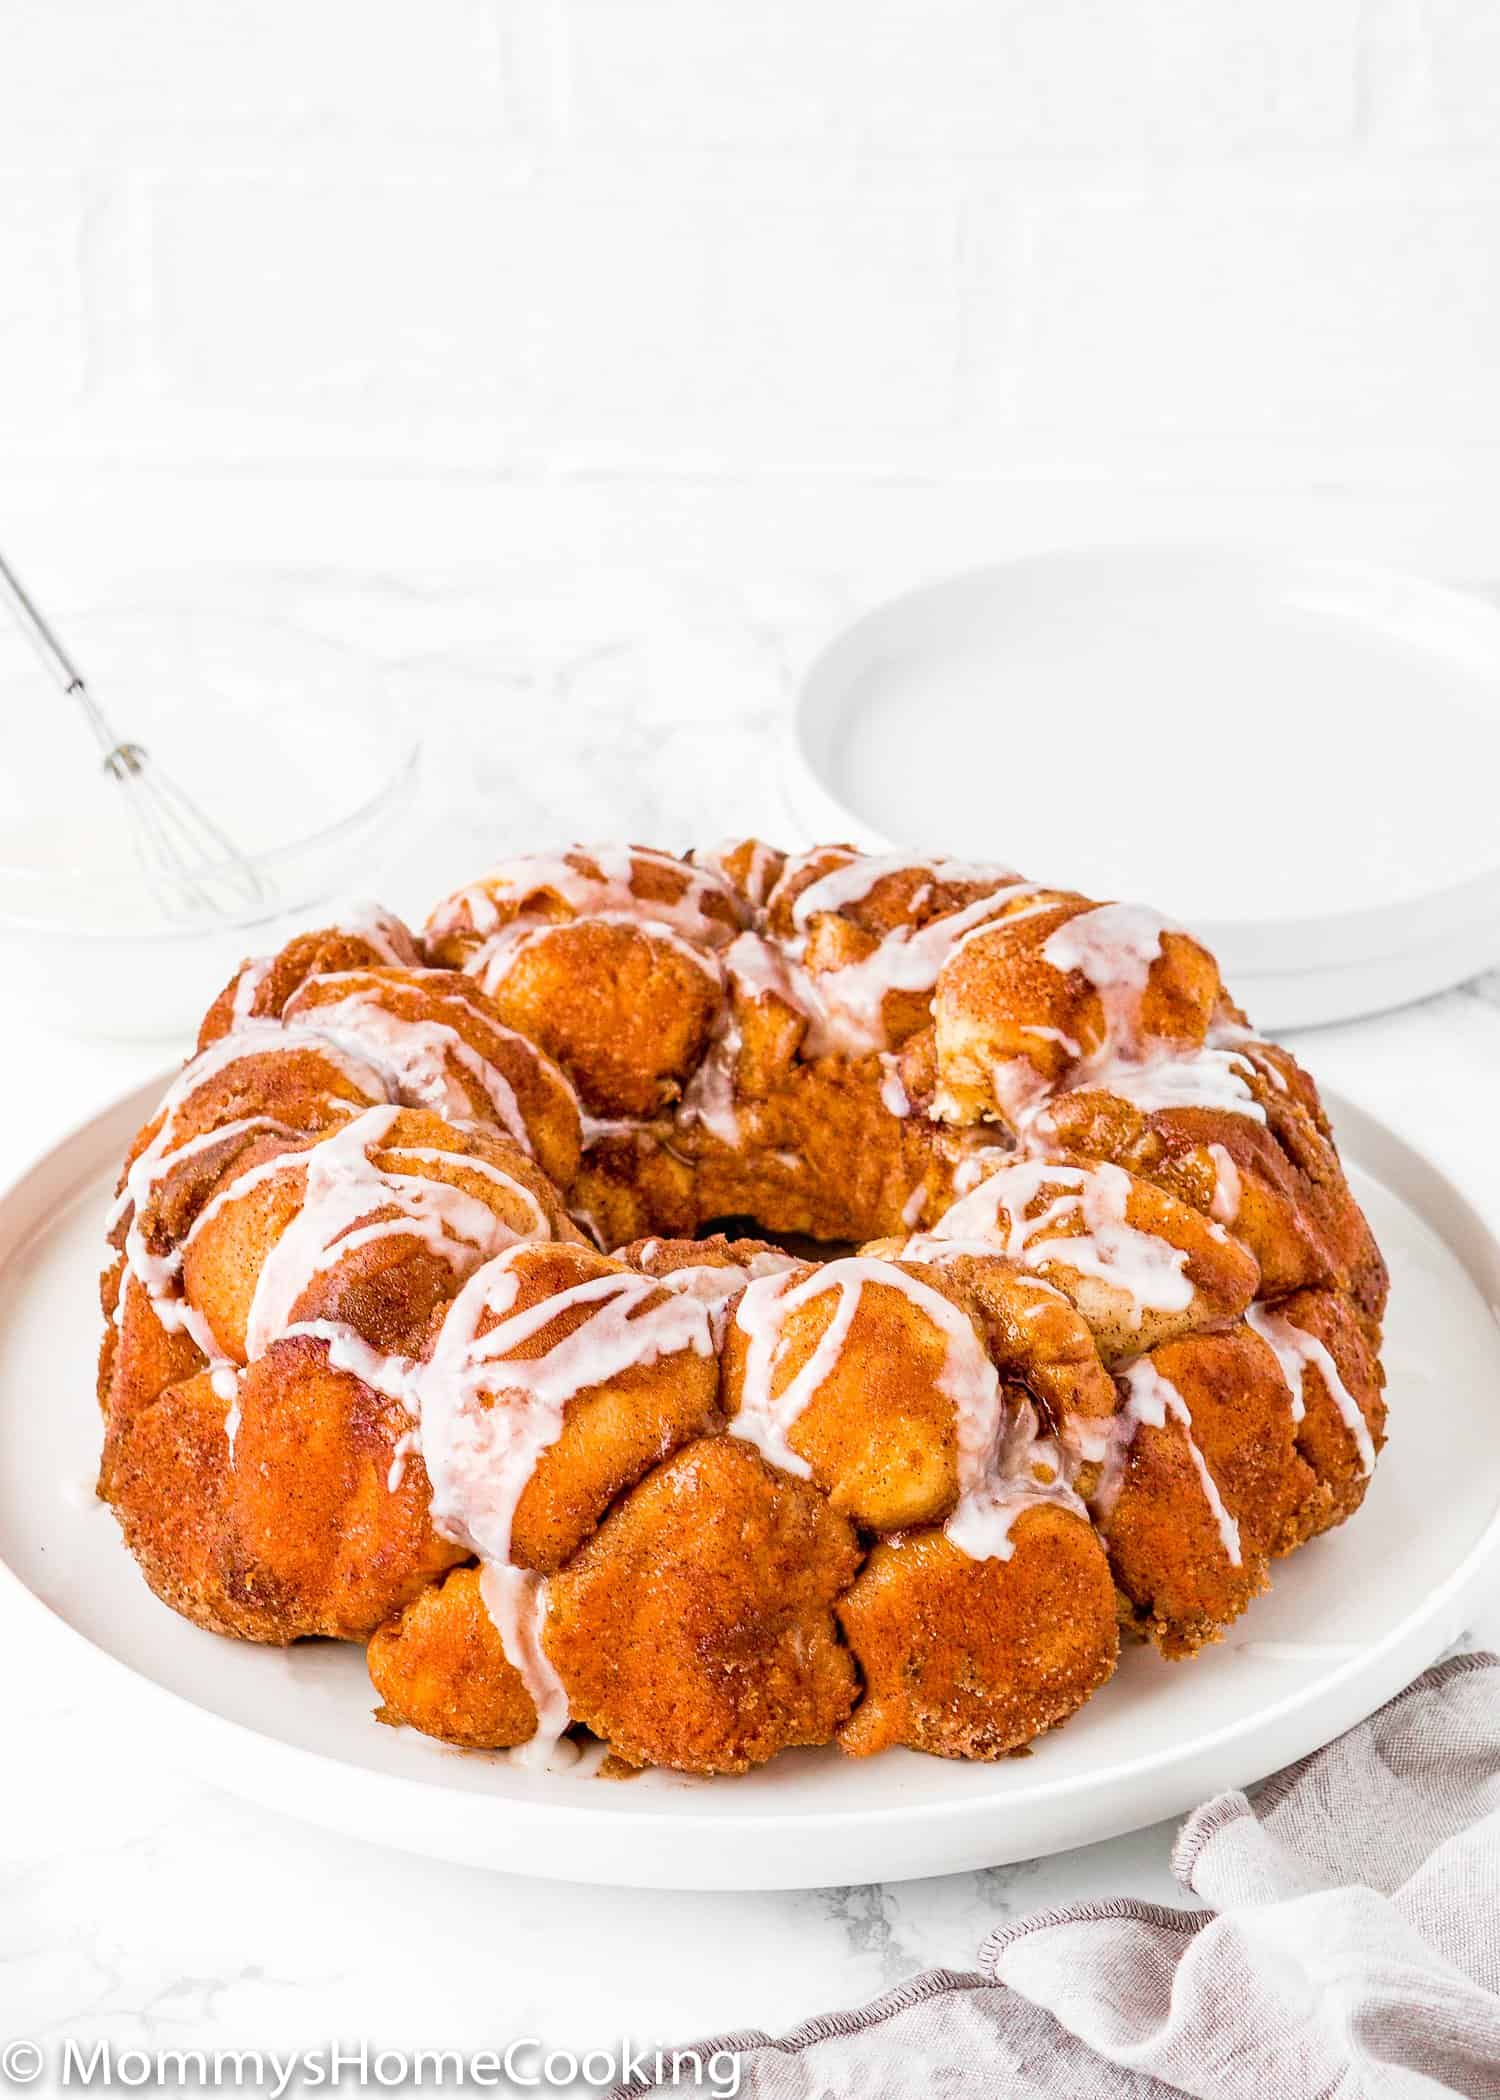 Homemade Eggless Monkey Bread's Home Cooking & Delicious Eggless Recipes